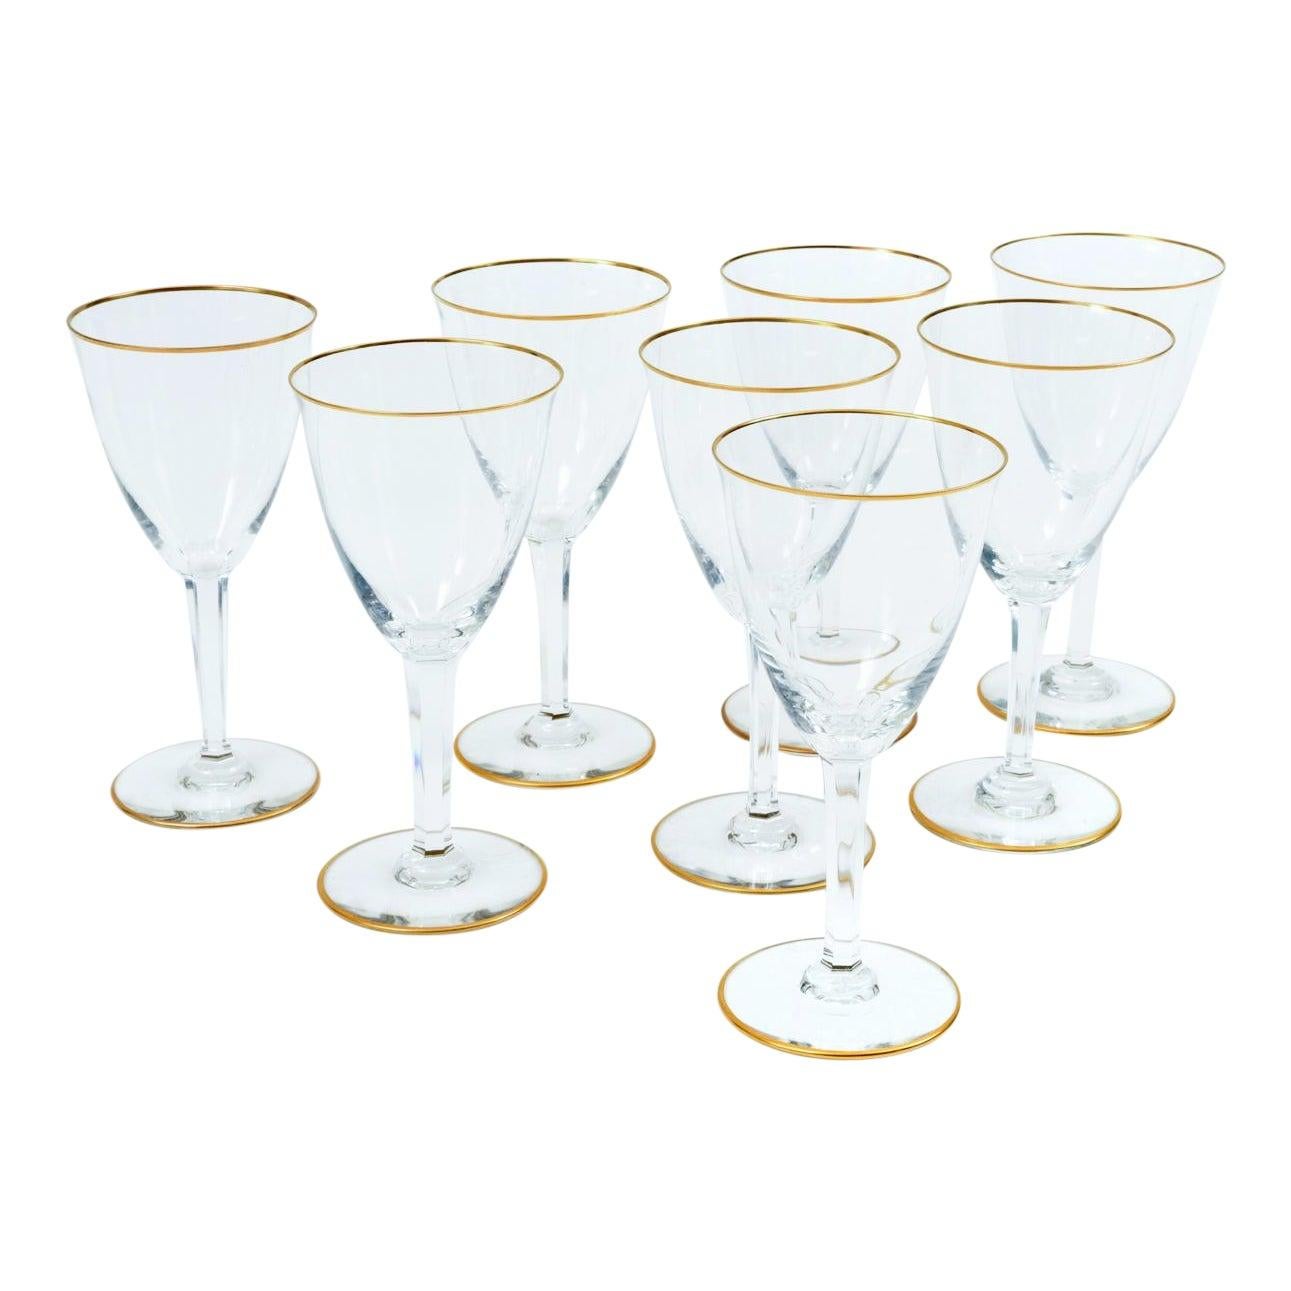 Baccarat crystal barware / tableware wine, water service for eight people with gold trim design details. Each glass is in great condition. Maker's mark etched undersigned. Each glass measure about 7. 1/2 inches tall x 4 inches diameter.
More than